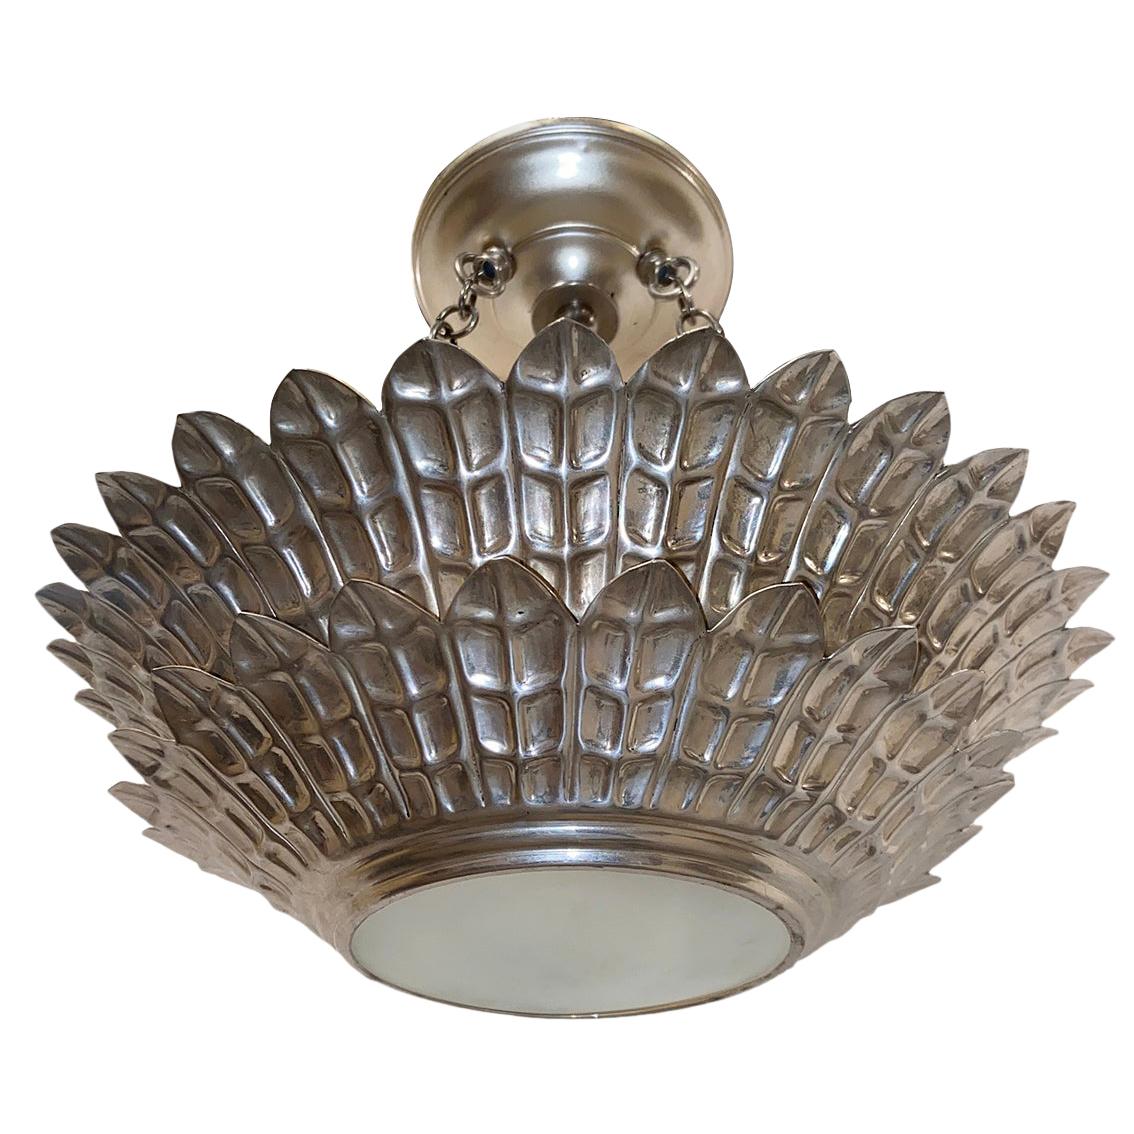 Set of Silver Plated Sunburst Light Fixtures, Sold Individually